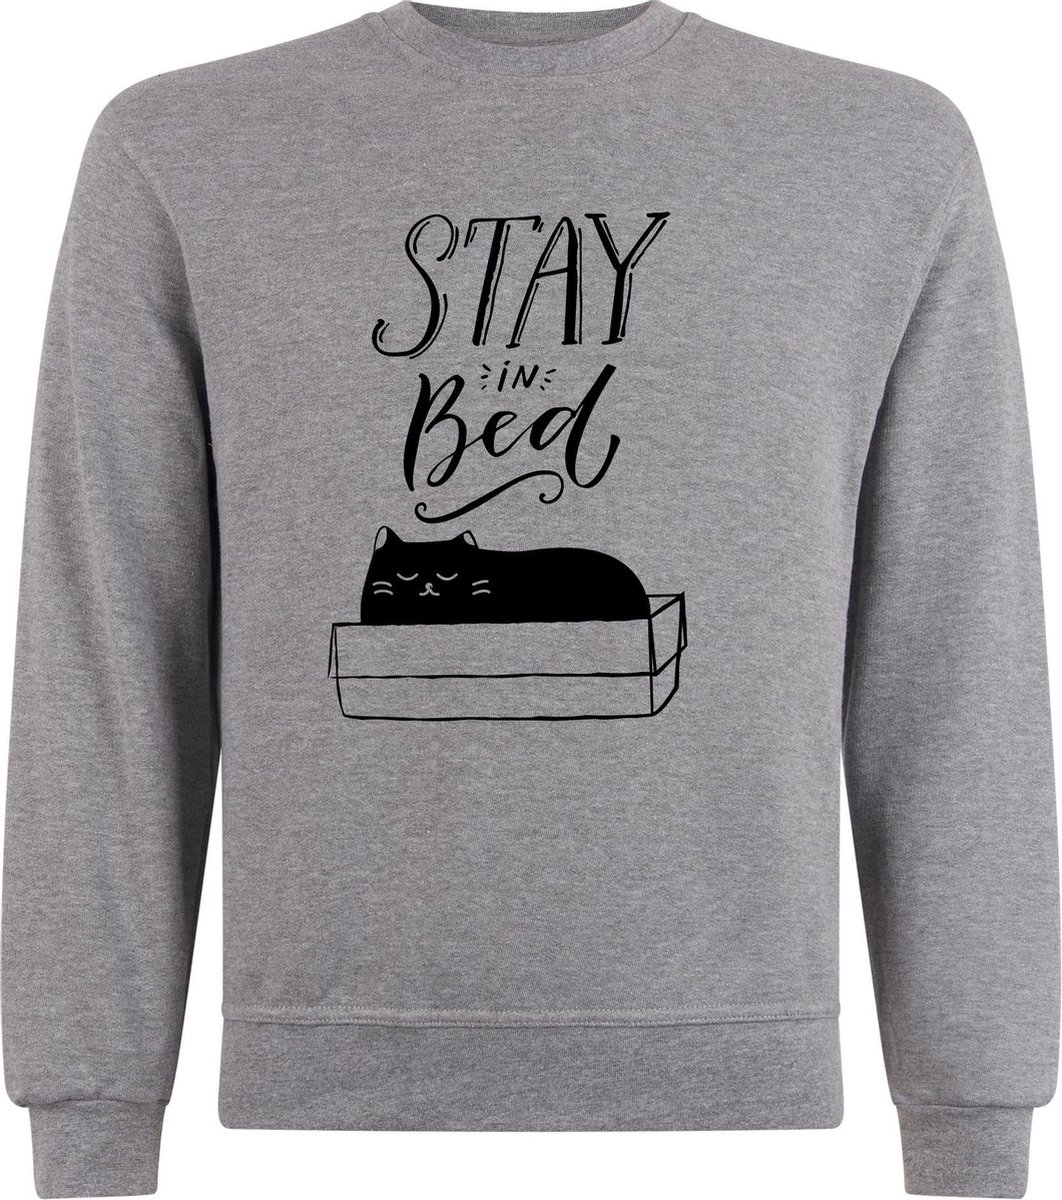 Sweater zonder capuchon - Jumper - Trui - Vest - Lifestyle sweater - Chill Sweater - Kat - Cat - Stay In Bed - S.Grey - M